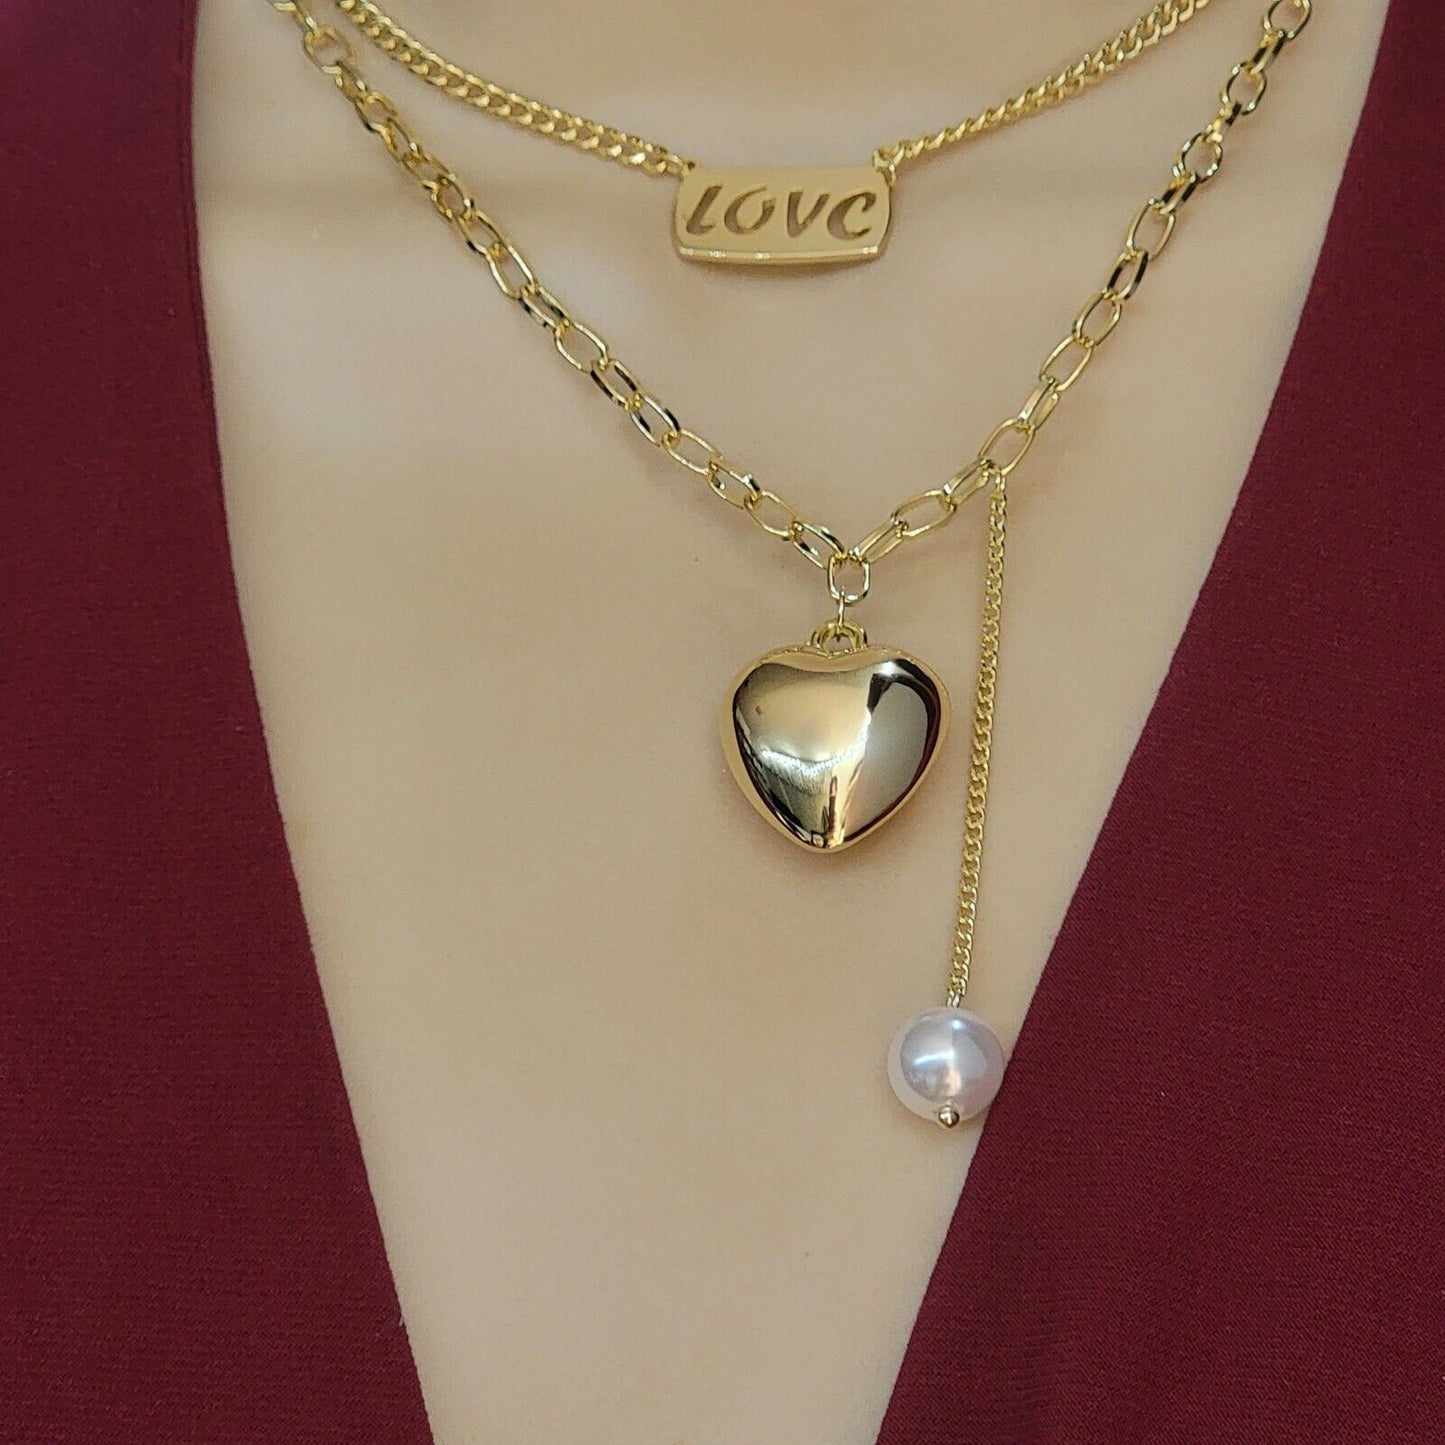 Necklaces - 14K Gold Plated. Love & Heart Double Layer Necklace. 2 Chains - Choker